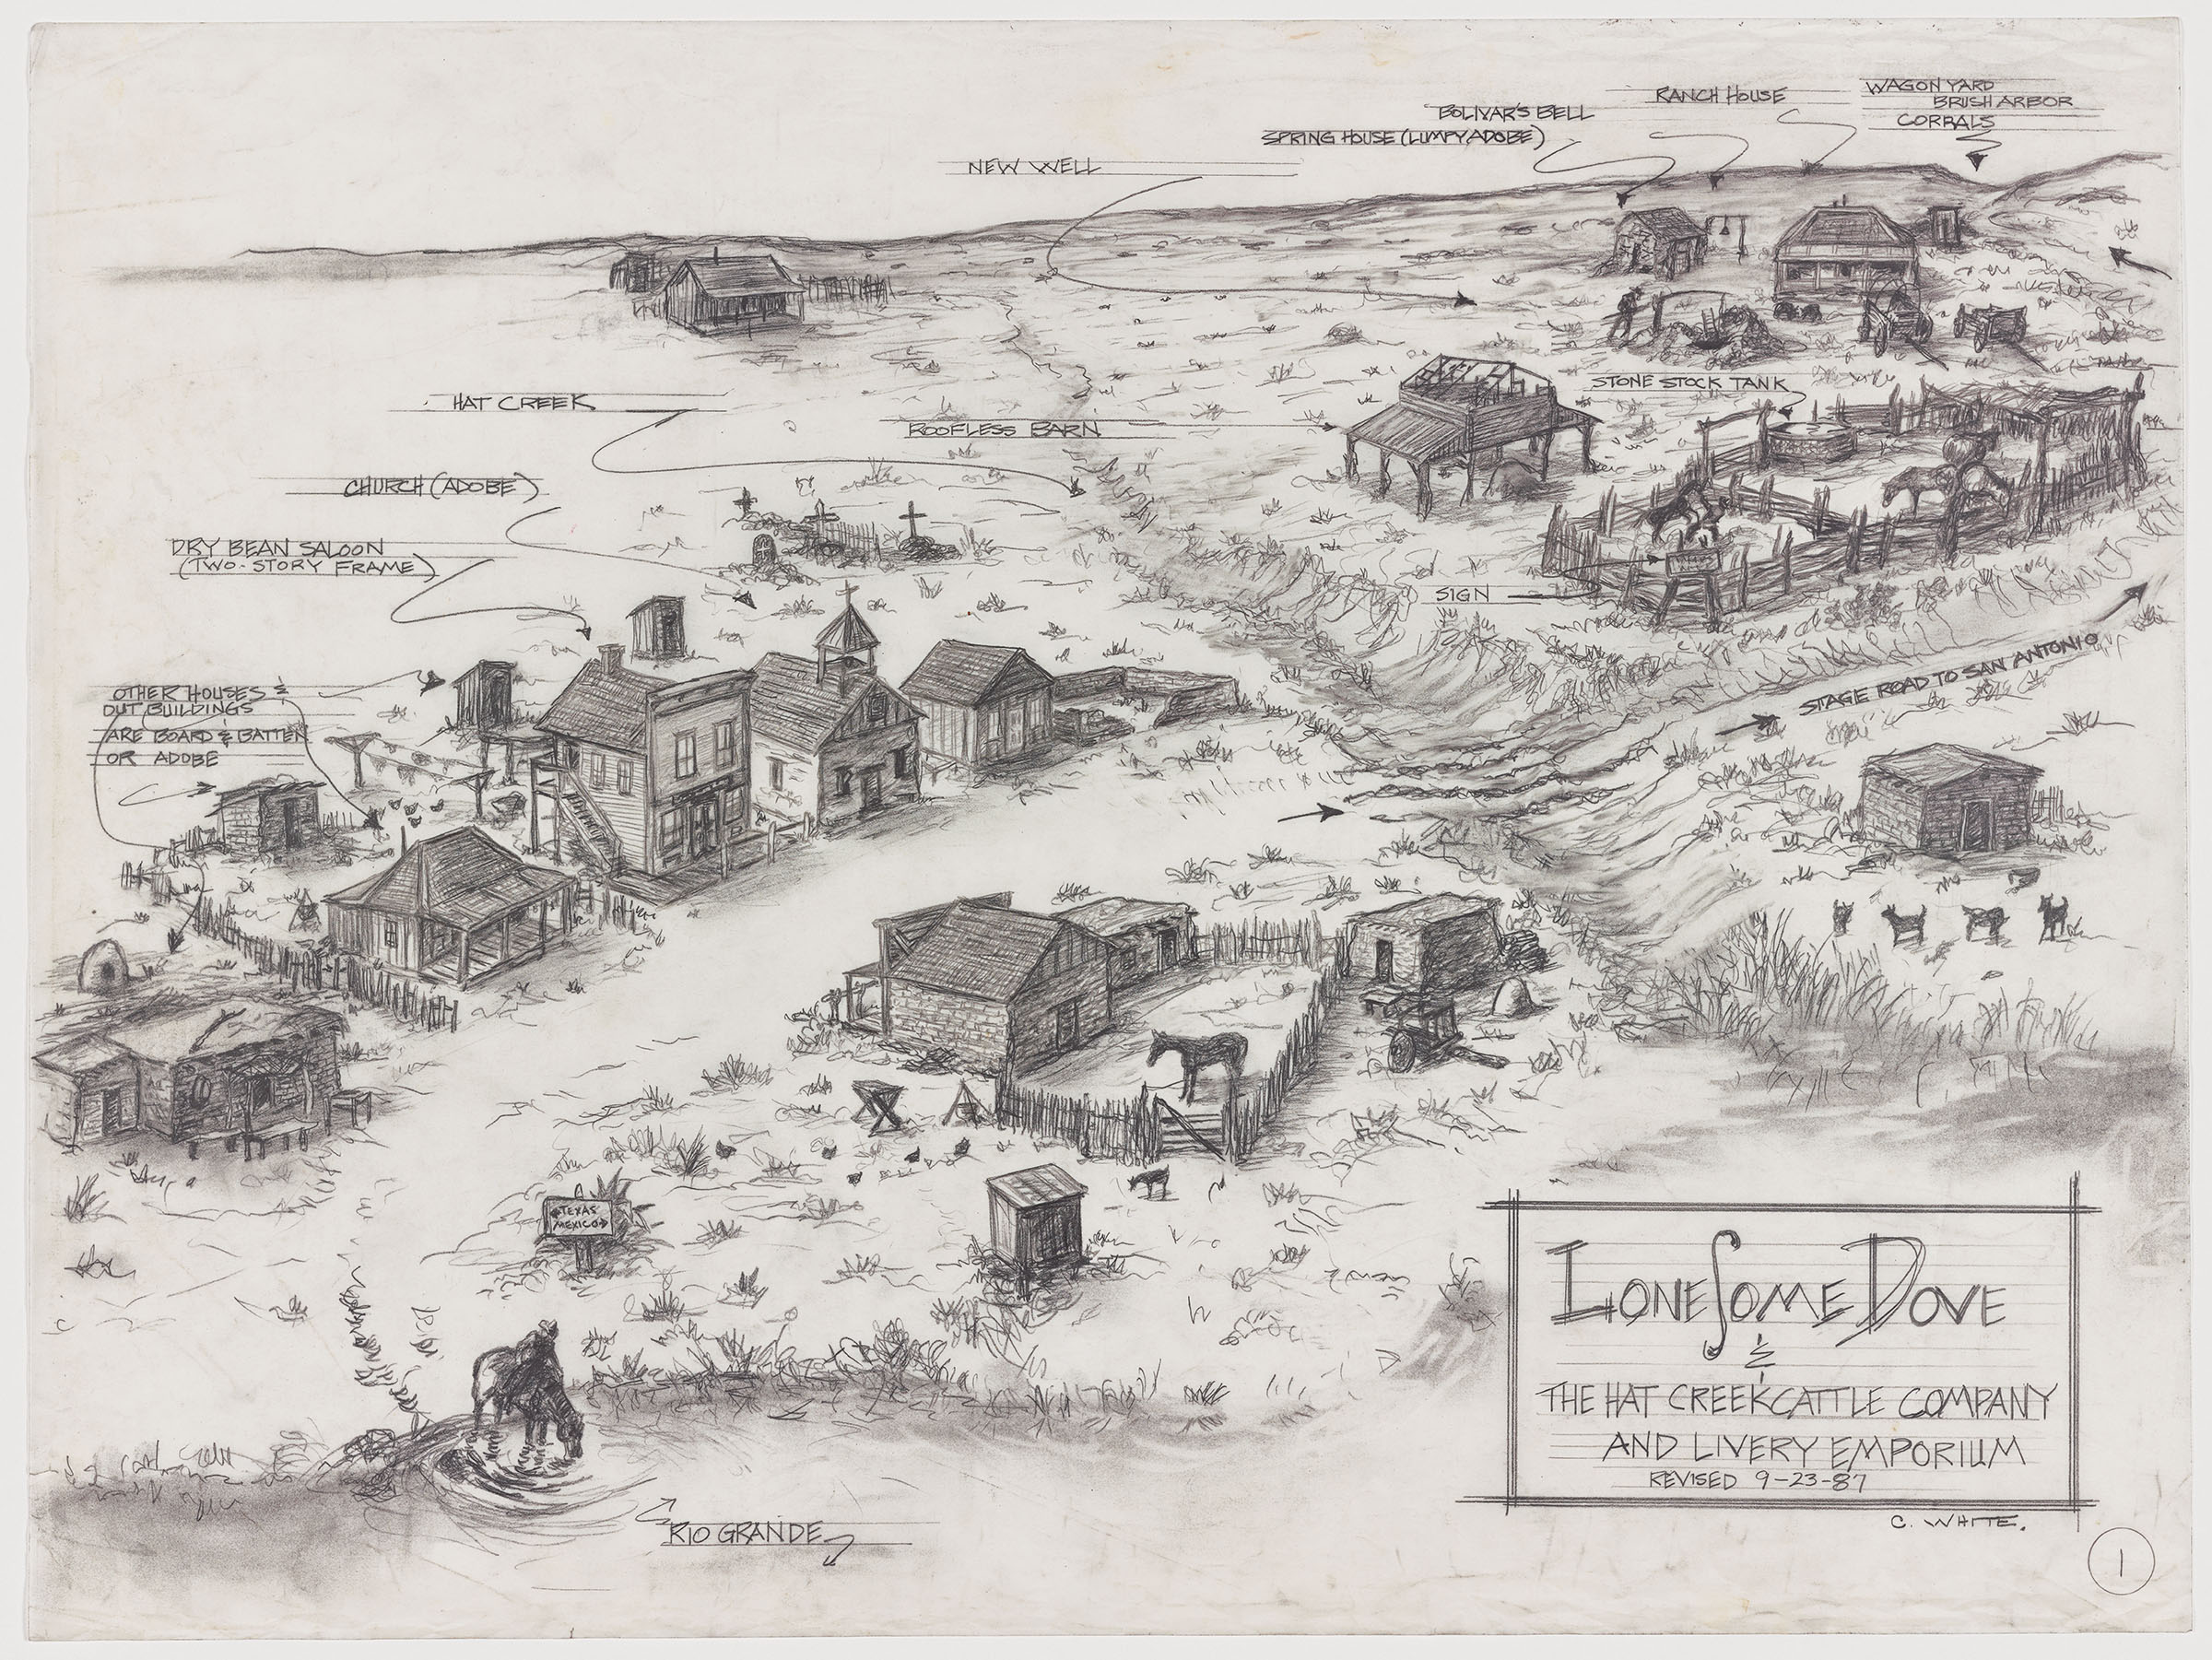 An illustration showing the set of Lonesome Dove